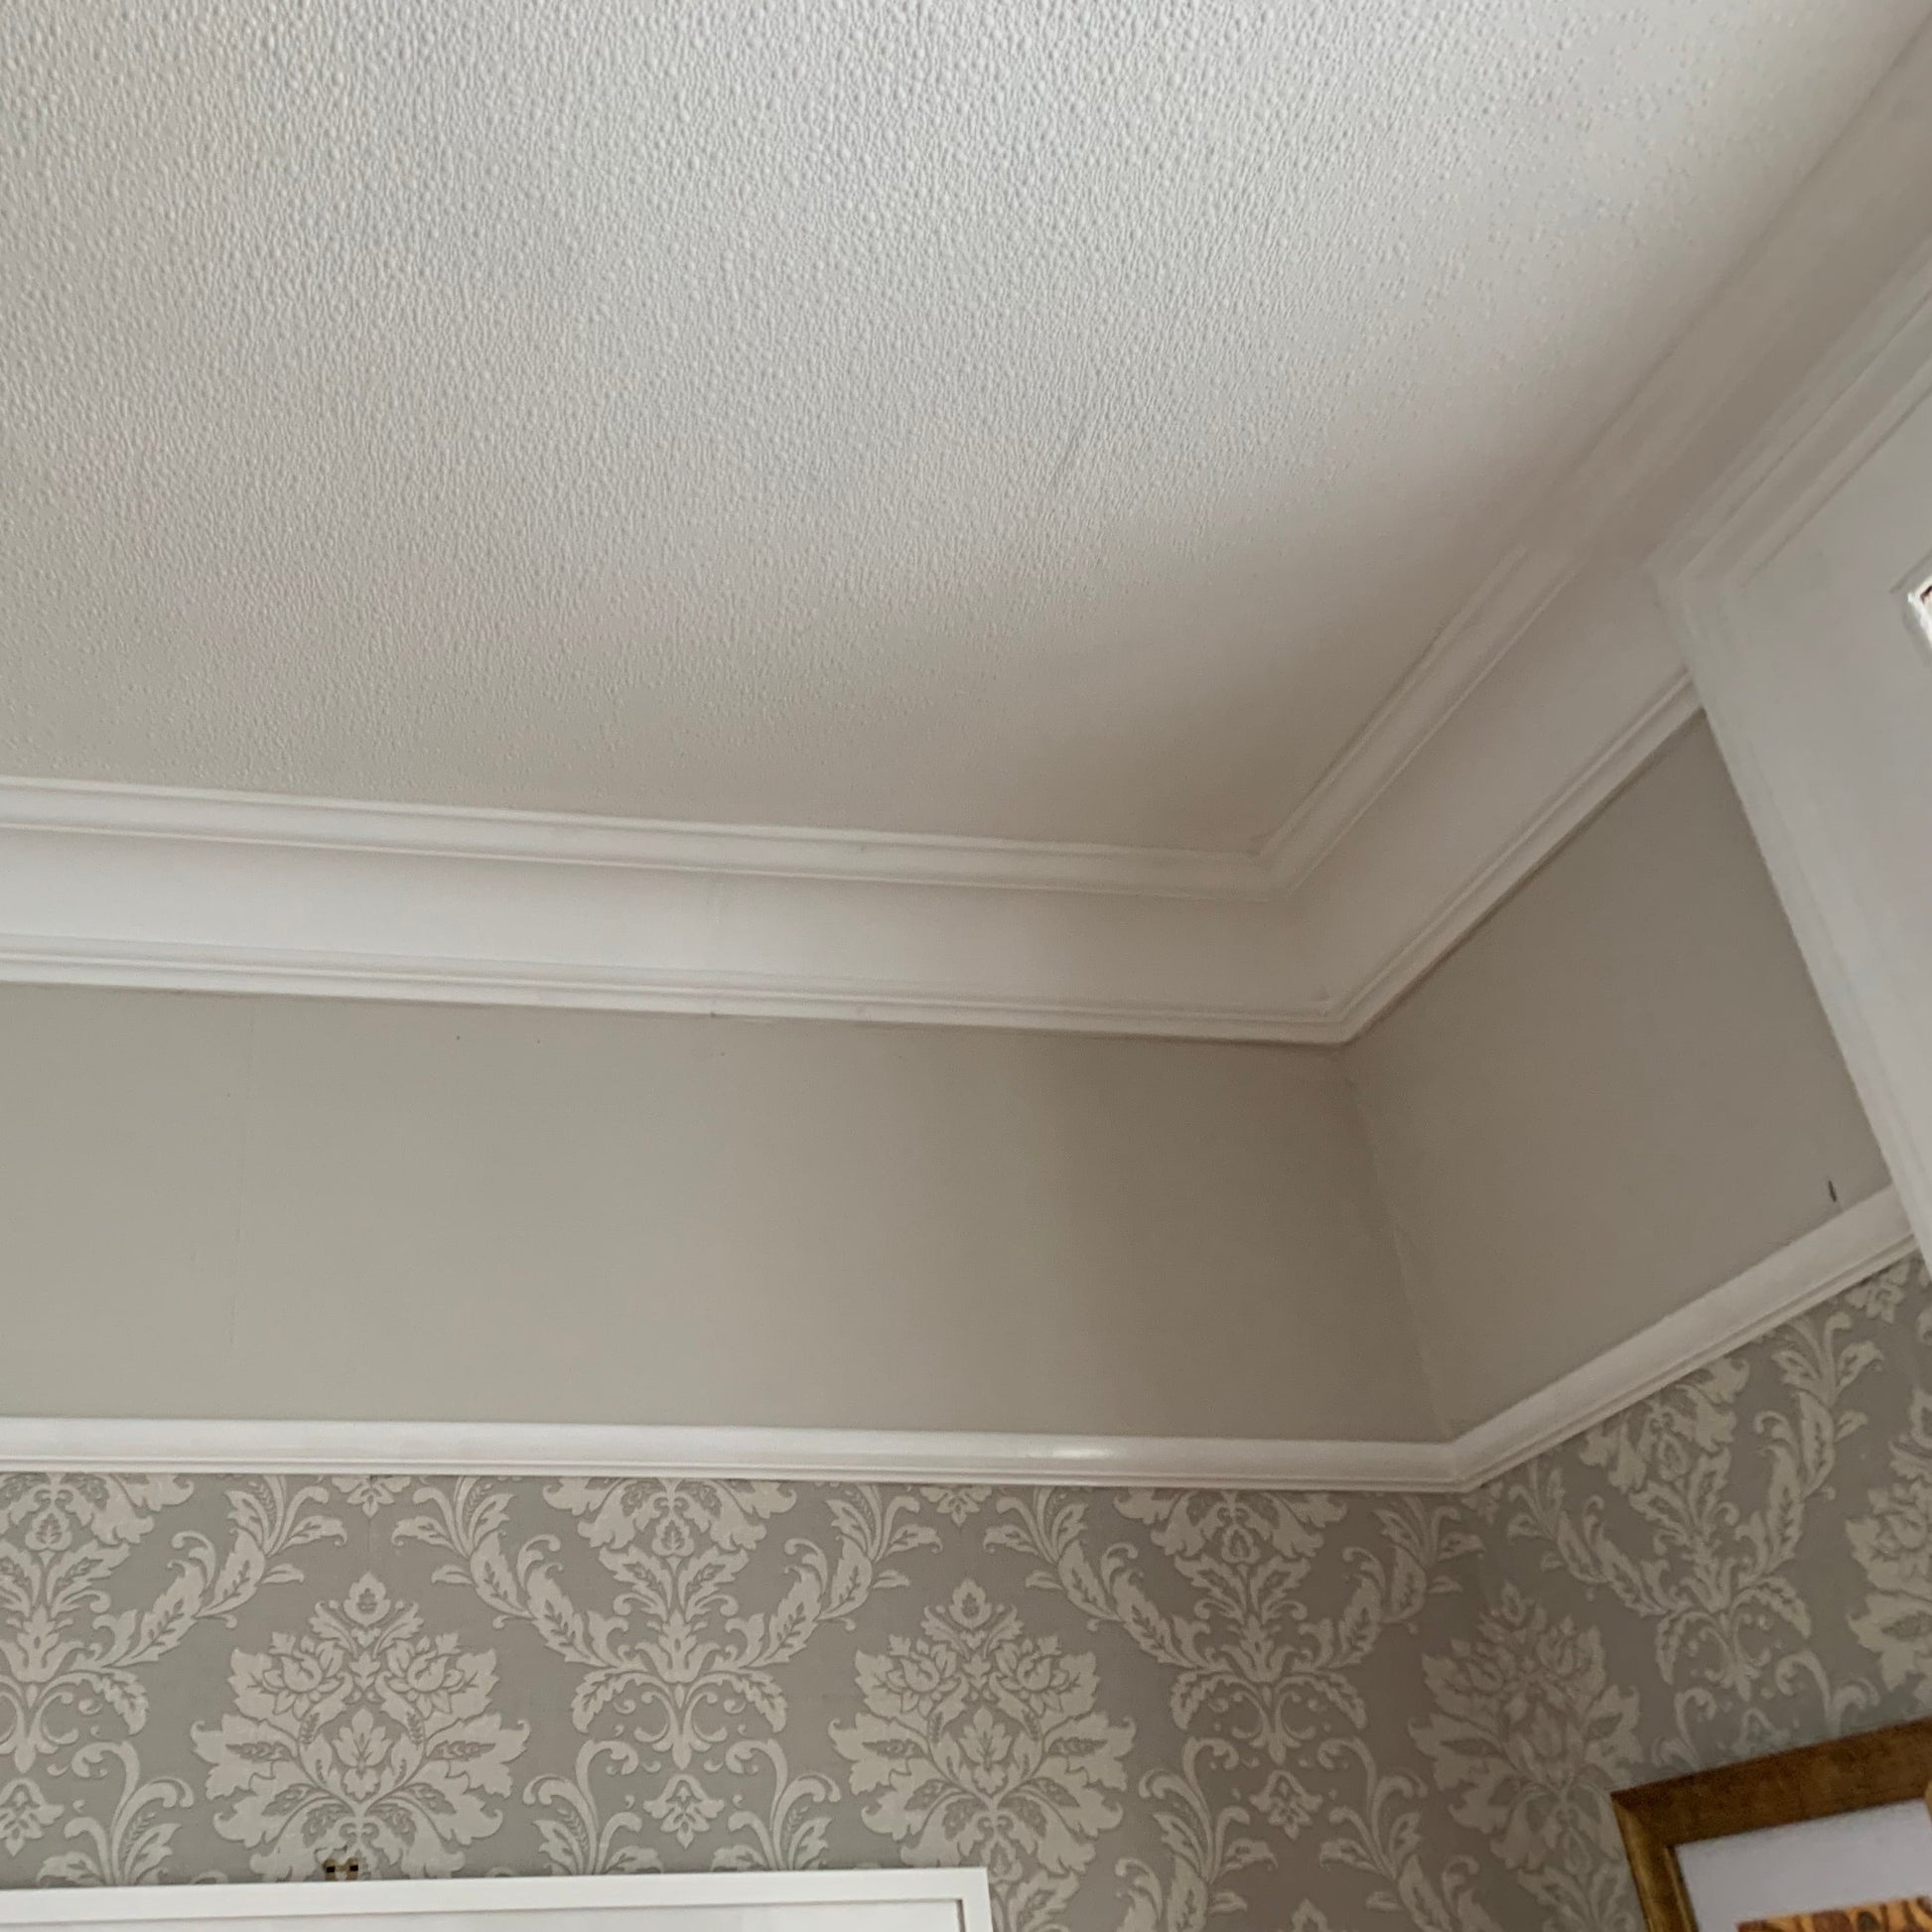 victorian plaster coving shown with floral wallpaper